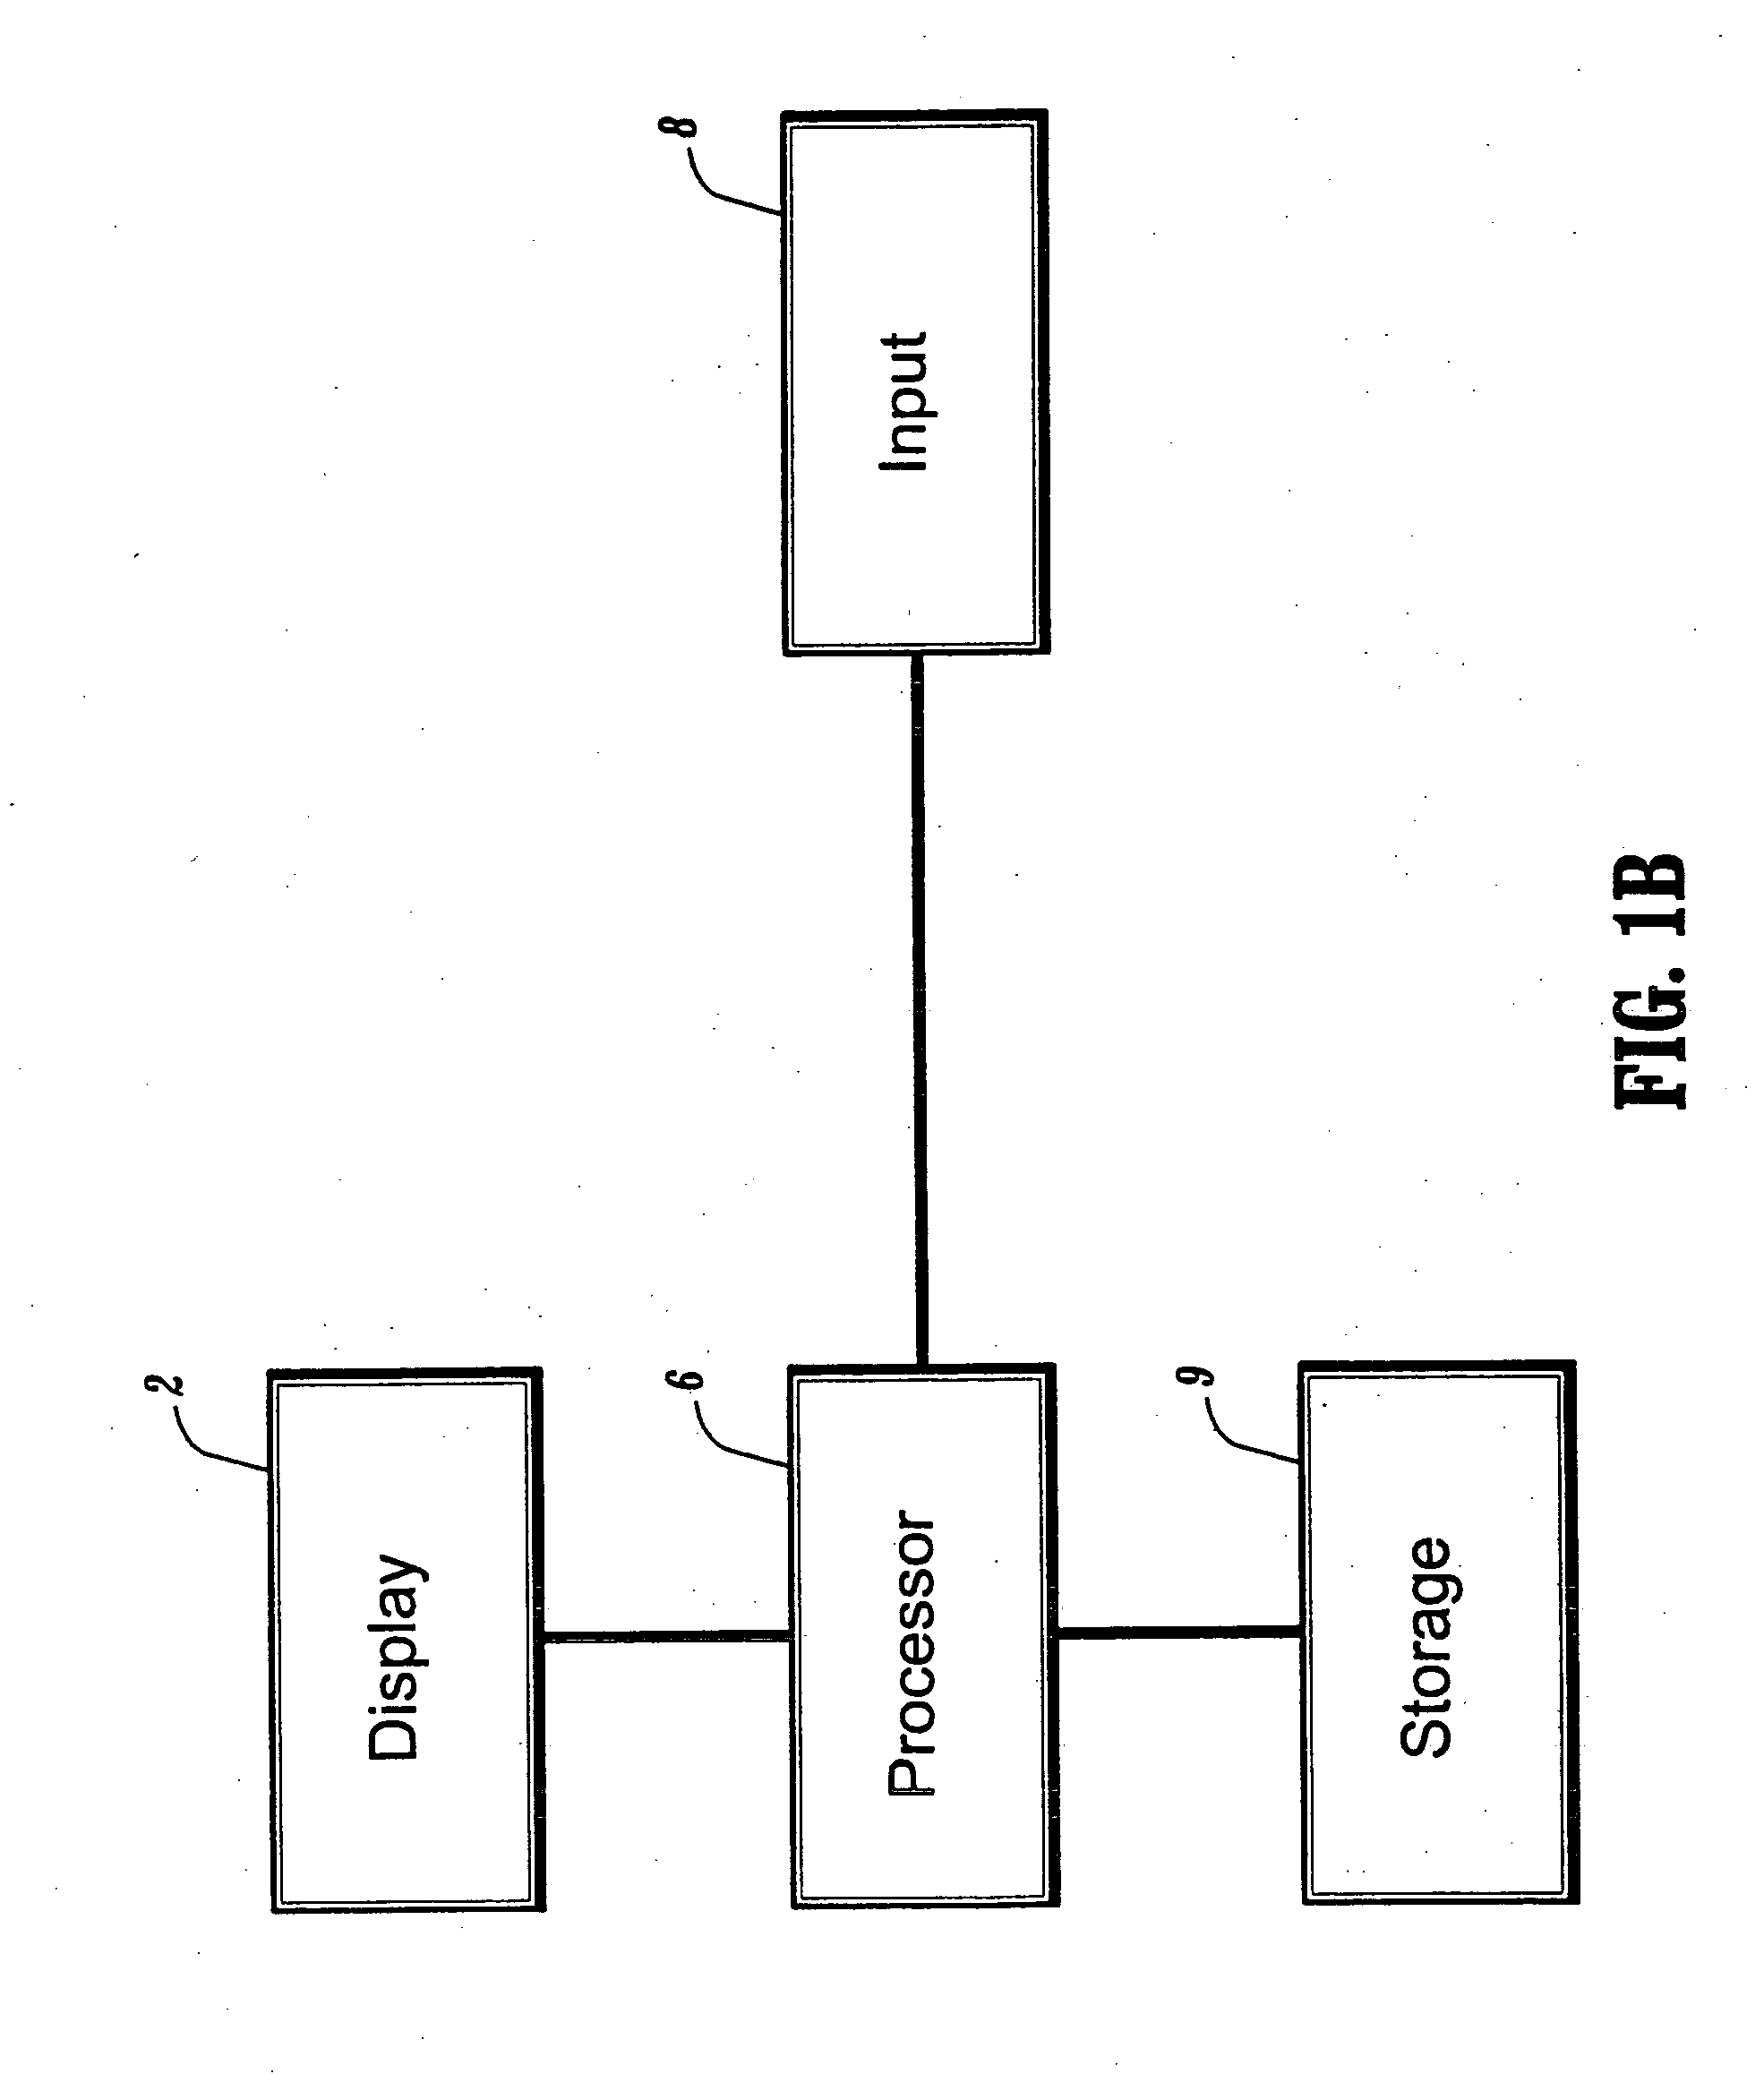 Integrated visualization of security information for an individual